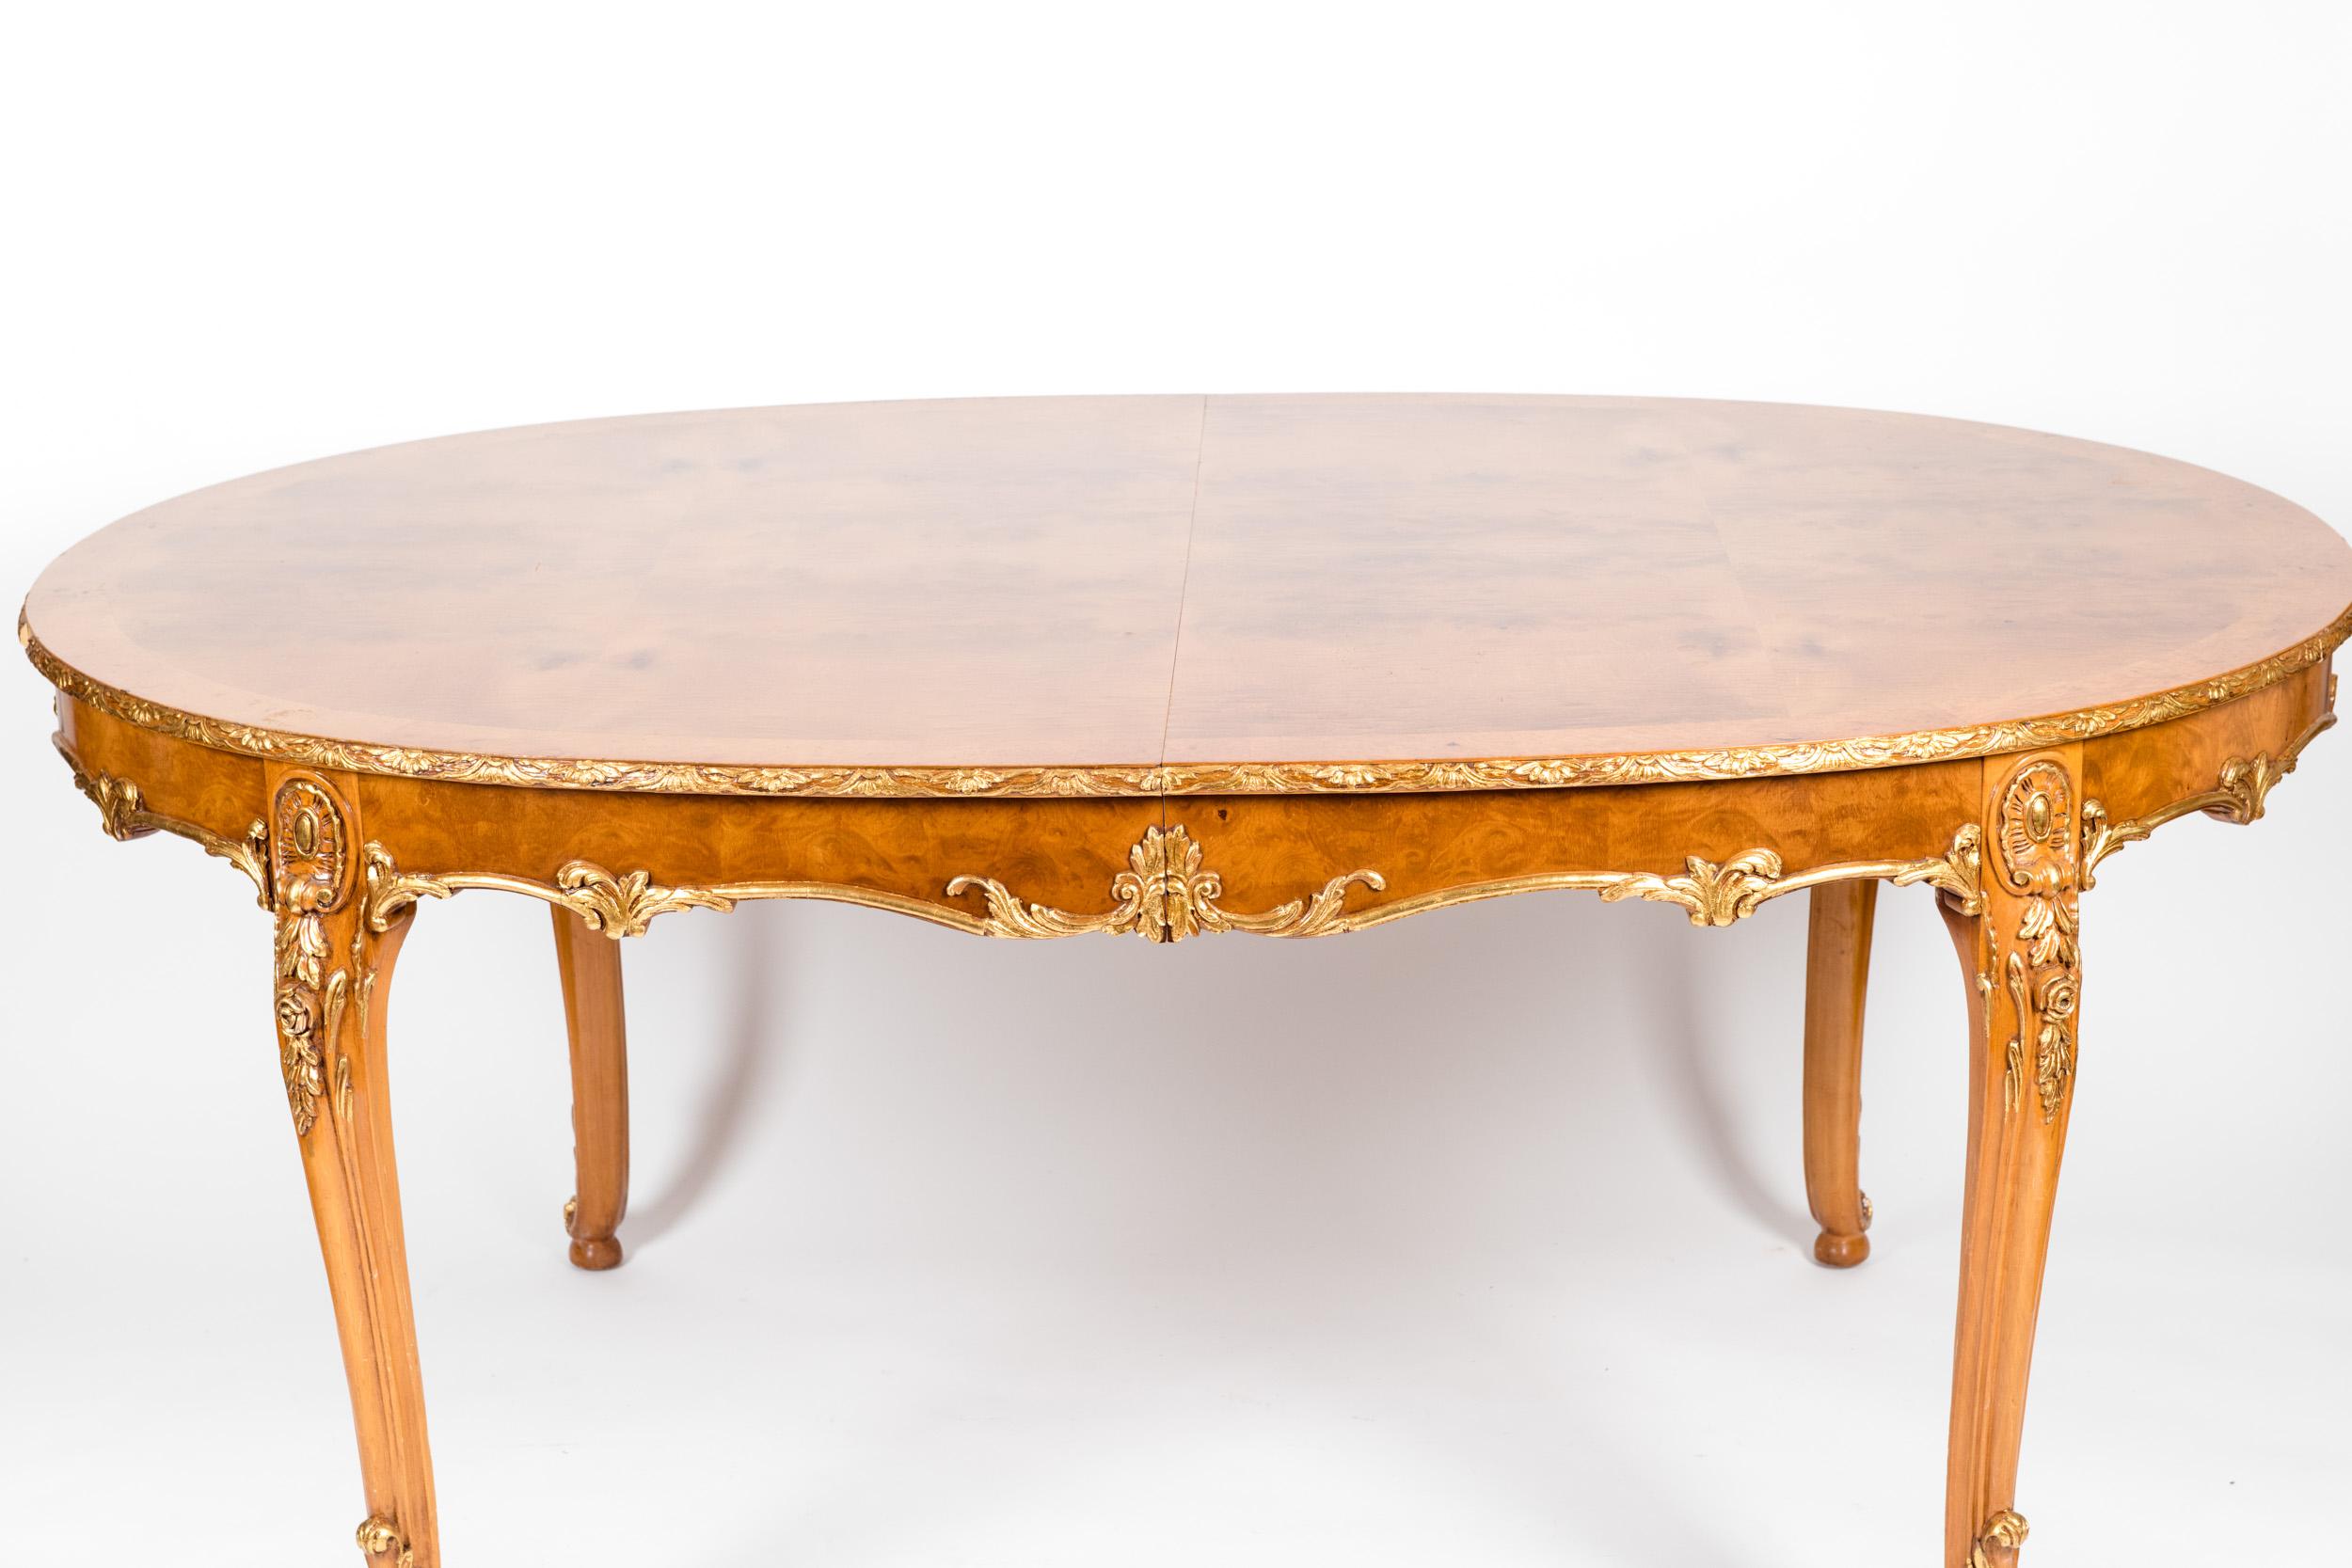 Burlwood dining room table with gilt design details. The dining table is in excellent vintage condition . Minor wear consistent with age/ use . The table comes with two extra leaves extension. The table without the extension measures 66 inches long